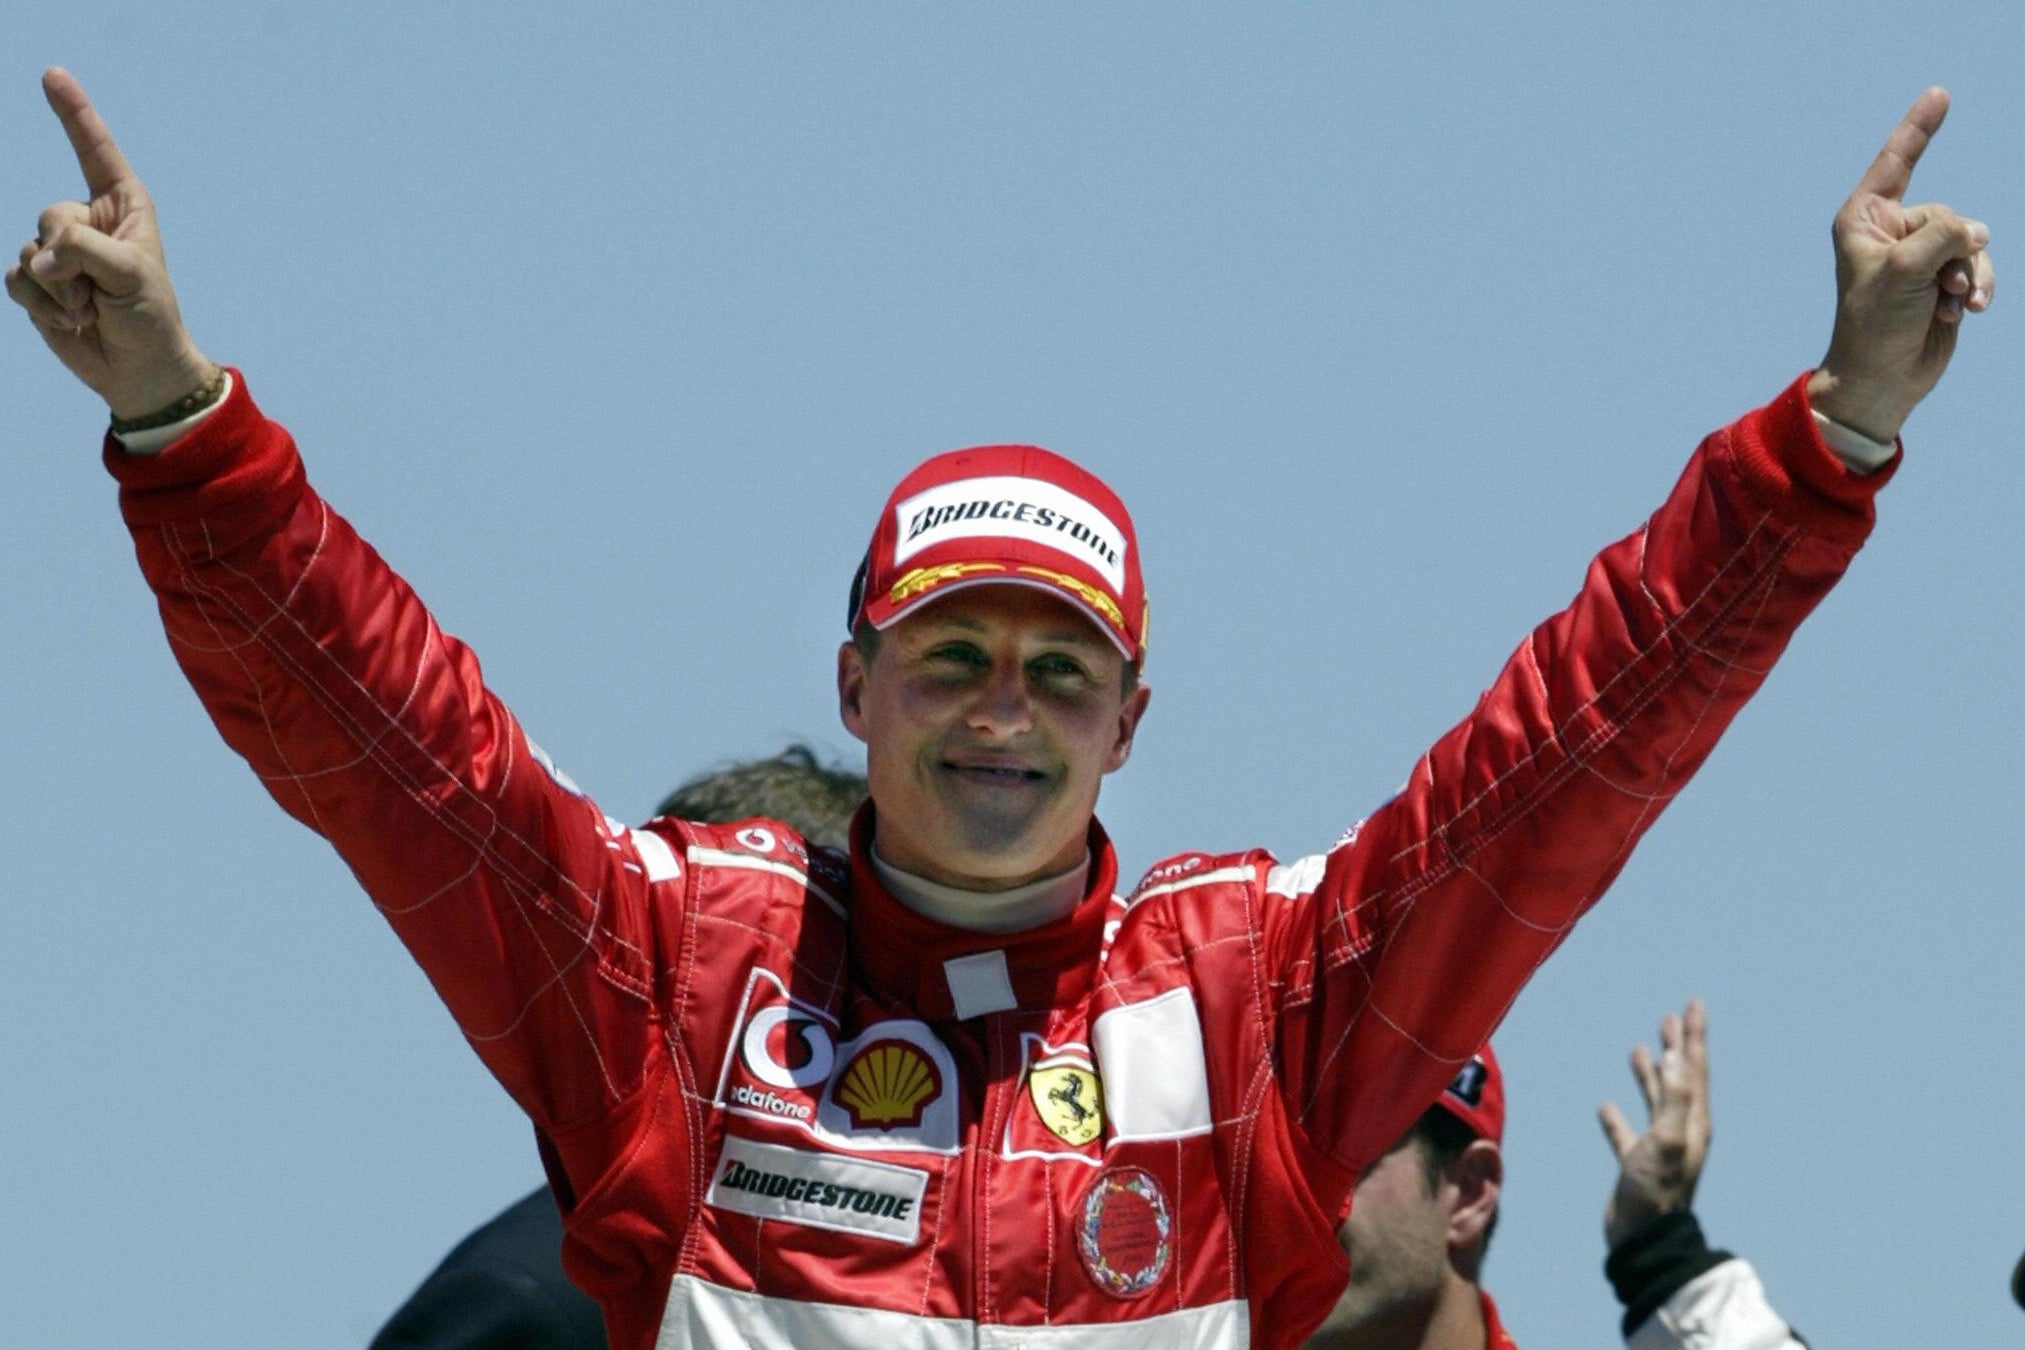 Schumacher smiles and raises his arms and pointer-fingers in celebration